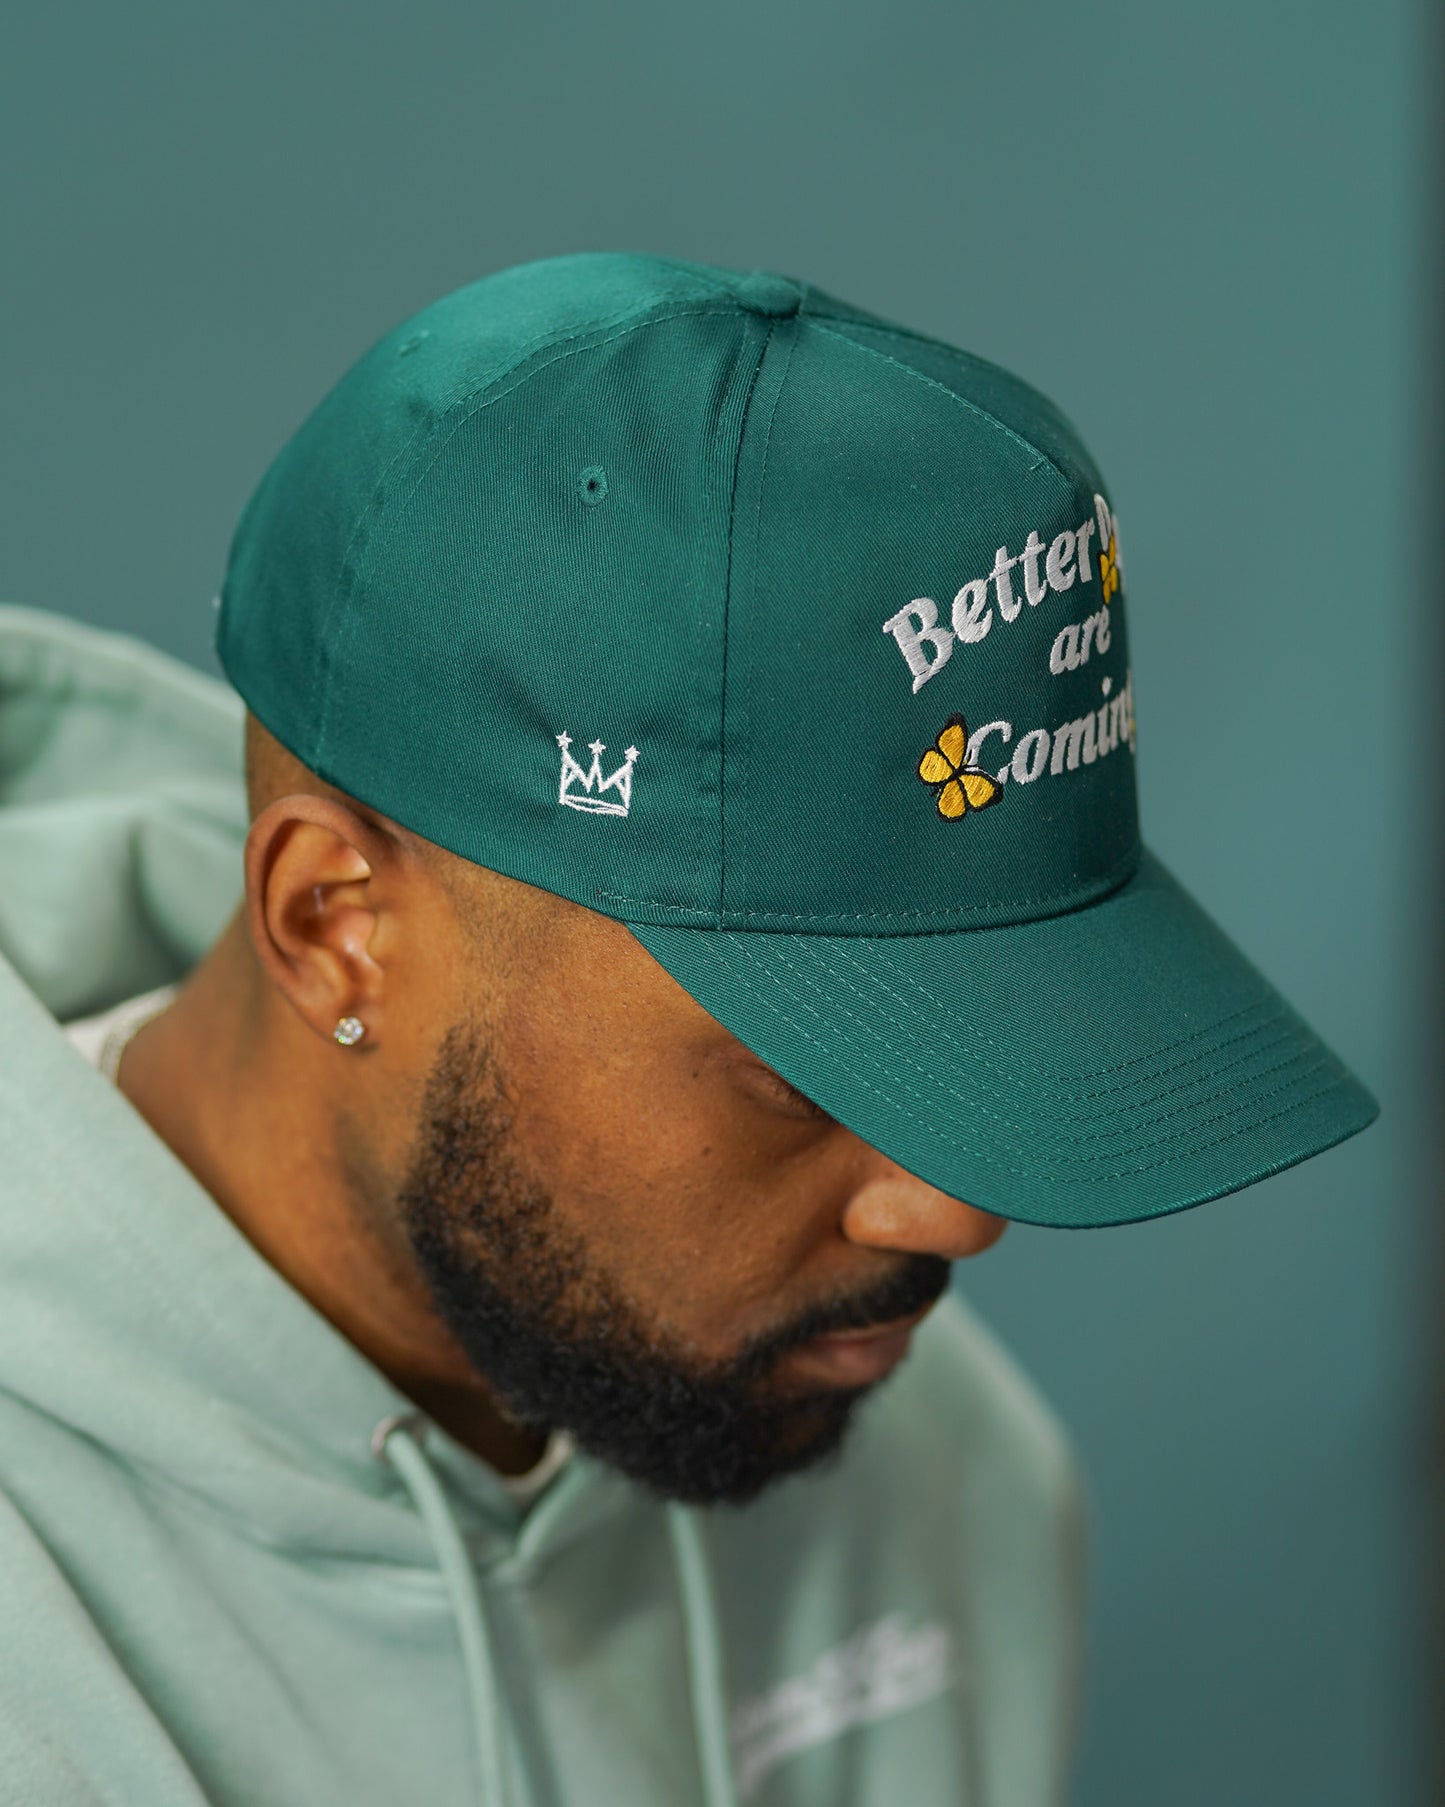 Better Days Snapback in Teal